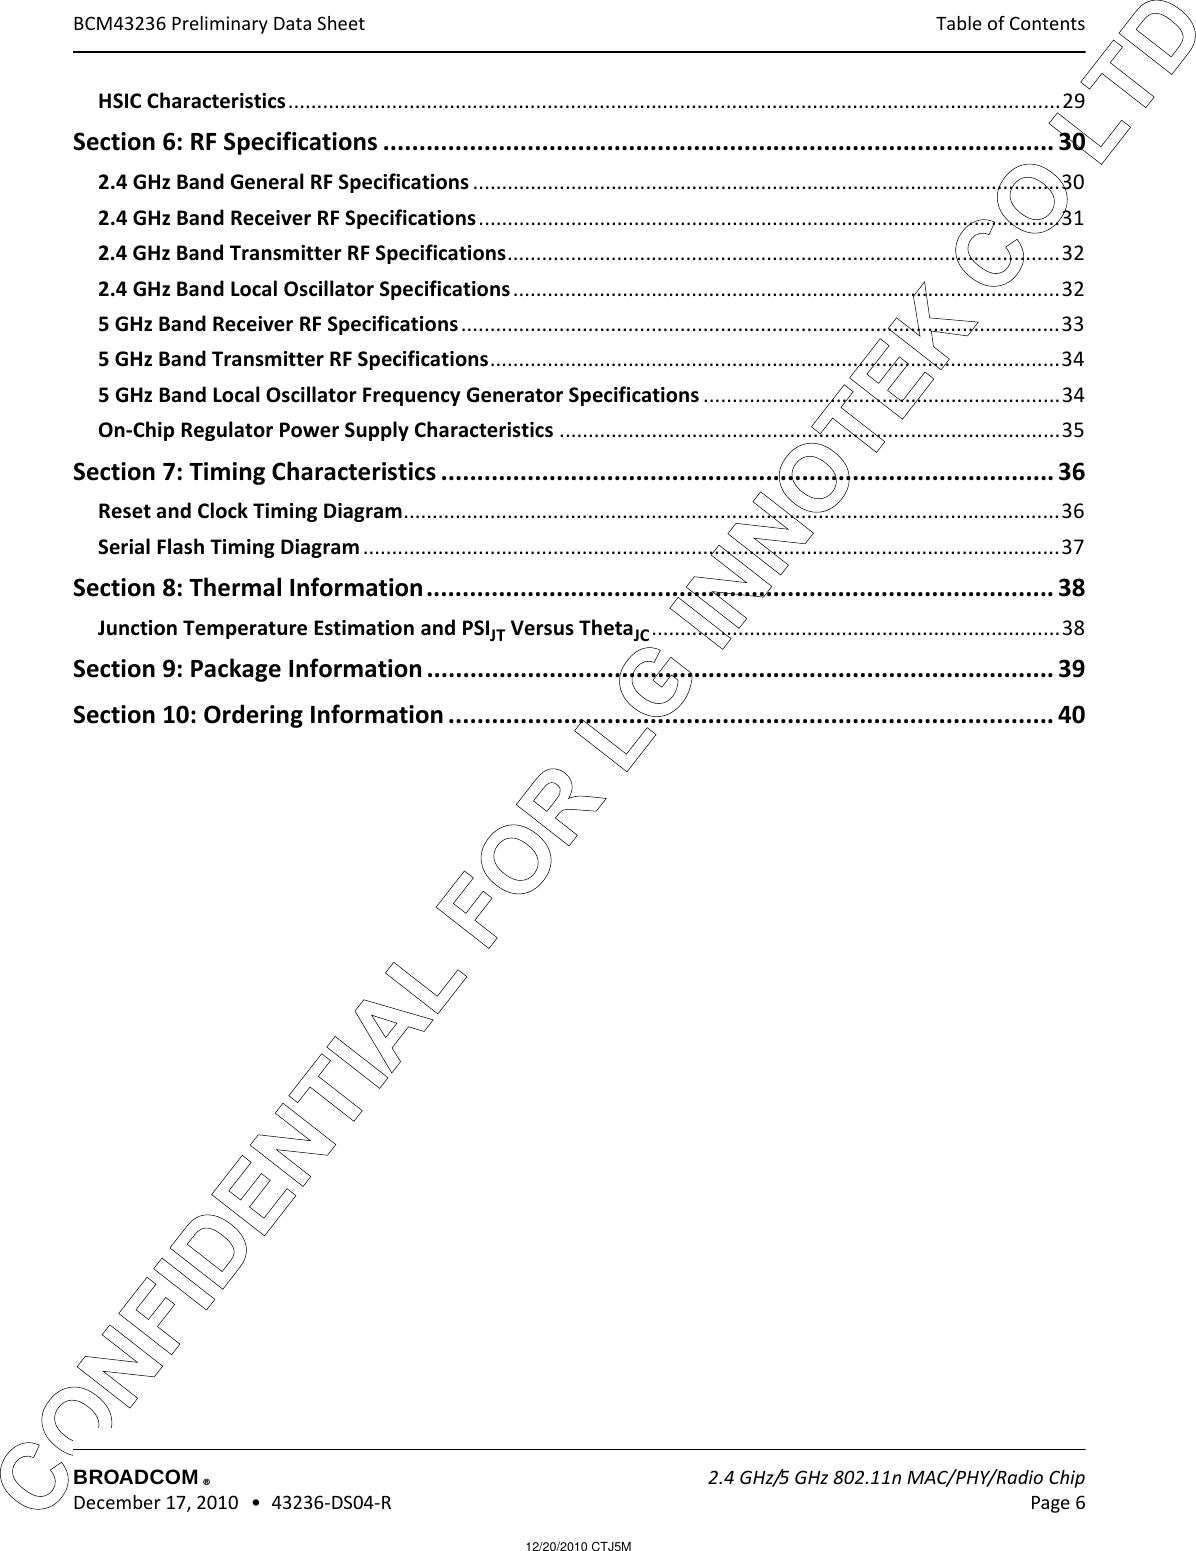 12/20/2010 CTJ5MCONFIDENTIAL FOR LG INNOTEK CO LTD Table of Contents BROADCOM    2.4 GHz/5 GHz 802.11n MAC/PHY/Radio Chip December 17, 2010   •  43236-DS04-R Page 6®BCM43236 Preliminary Data SheetHSIC Characteristics......................................................................................................................................29Section 6: RF Specifications ............................................................................................. 302.4 GHz Band General RF Specifications ......................................................................................................302.4 GHz Band Receiver RF Specifications.....................................................................................................312.4 GHz Band Transmitter RF Specifications................................................................................................322.4 GHz Band Local Oscillator Specifications...............................................................................................325 GHz Band Receiver RF Specifications ........................................................................................................335 GHz Band Transmitter RF Specifications...................................................................................................345 GHz Band Local Oscillator Frequency Generator Specifications ..............................................................34On-Chip Regulator Power Supply Characteristics .......................................................................................35Section 7: Timing Characteristics ..................................................................................... 36Reset and Clock Timing Diagram..................................................................................................................36Serial Flash Timing Diagram .........................................................................................................................37Section 8: Thermal Information....................................................................................... 38Junction Temperature Estimation and PSIJT Versus ThetaJC .......................................................................38Section 9: Package Information ....................................................................................... 39Section 10: Ordering Information .................................................................................... 40